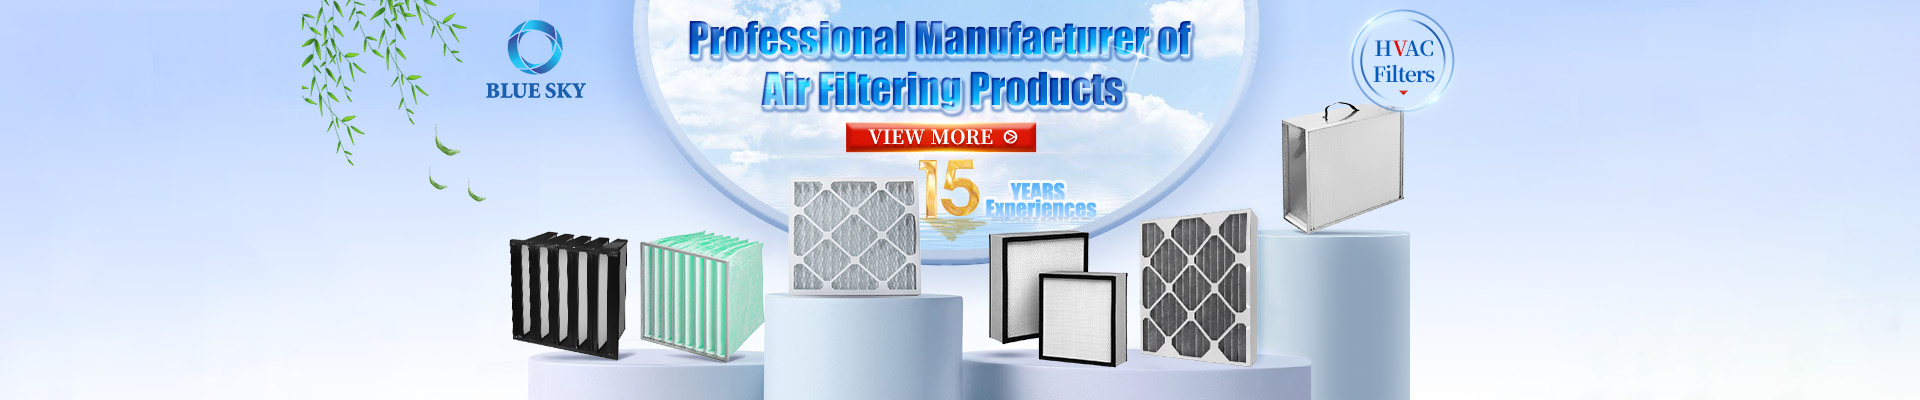 Blue Sky Professional Manufacturer of Air Filtering Products